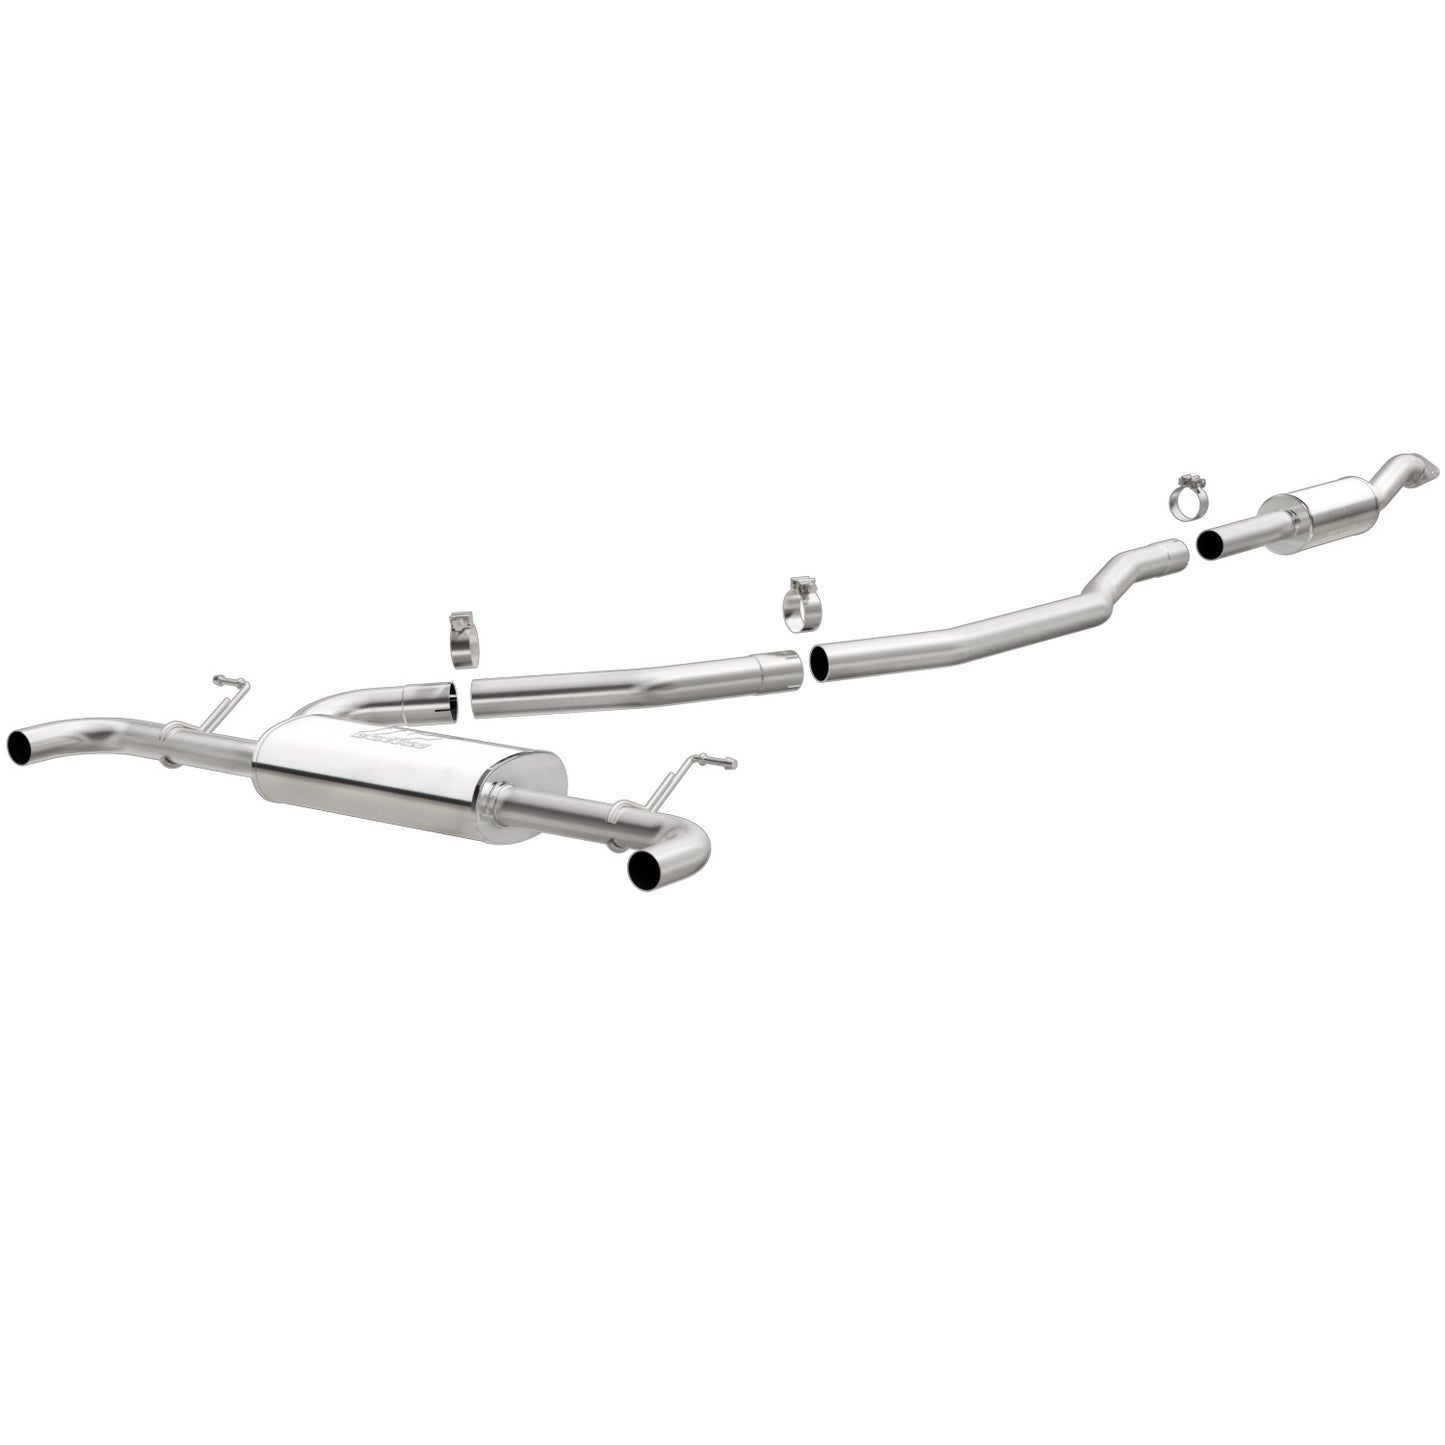 MagnaFlow Street Series Cat-Back Performance Exhaust System 15230